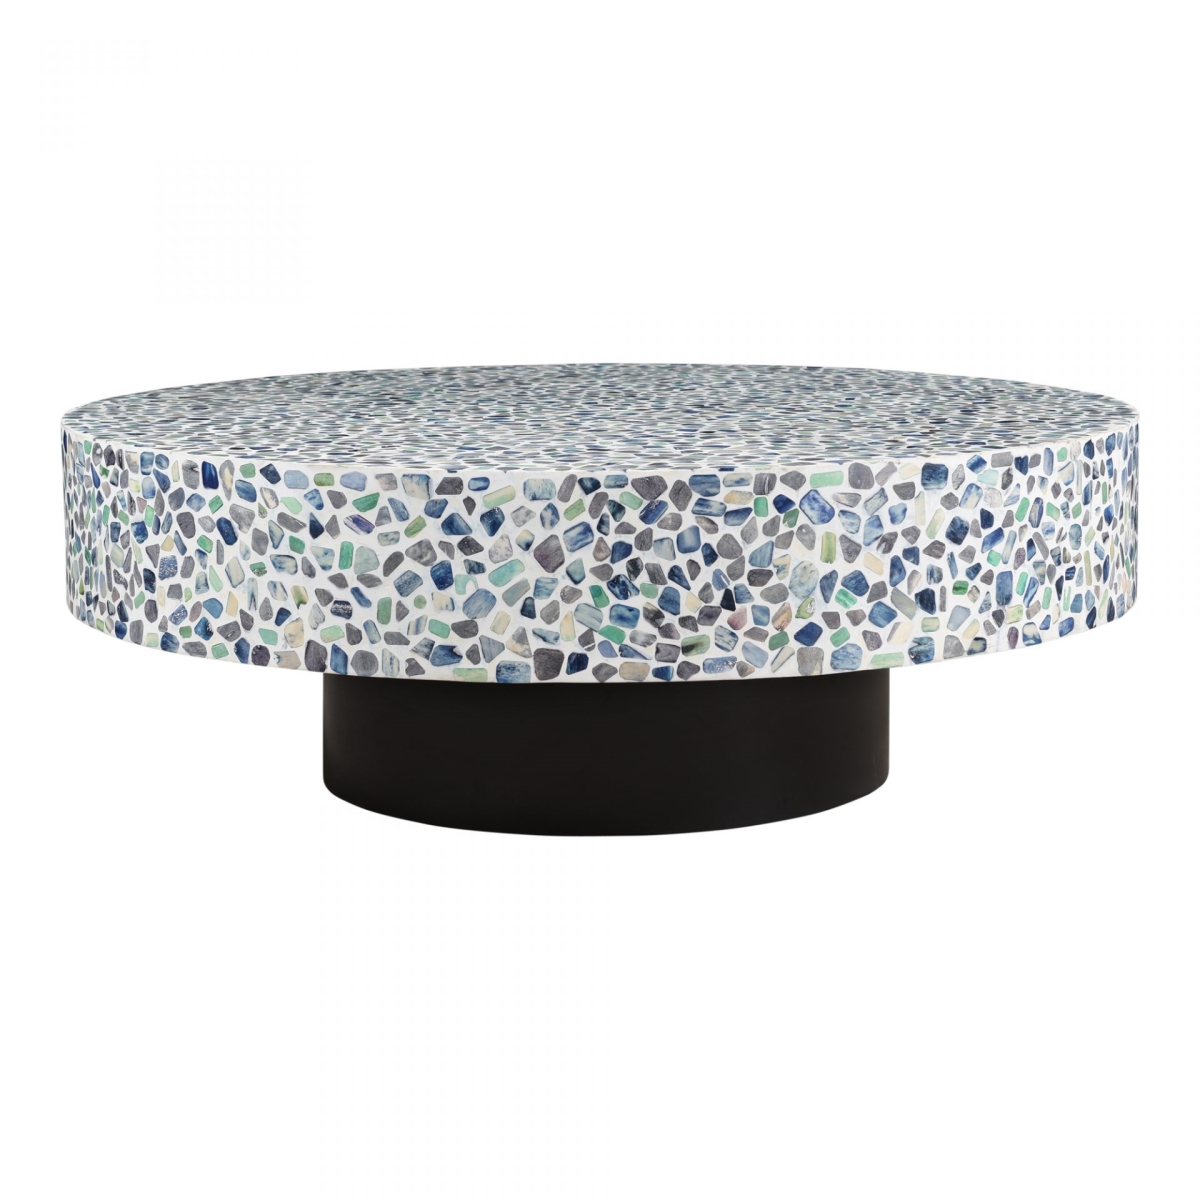 Gz-1123-37 Olympia Coffee Table Large